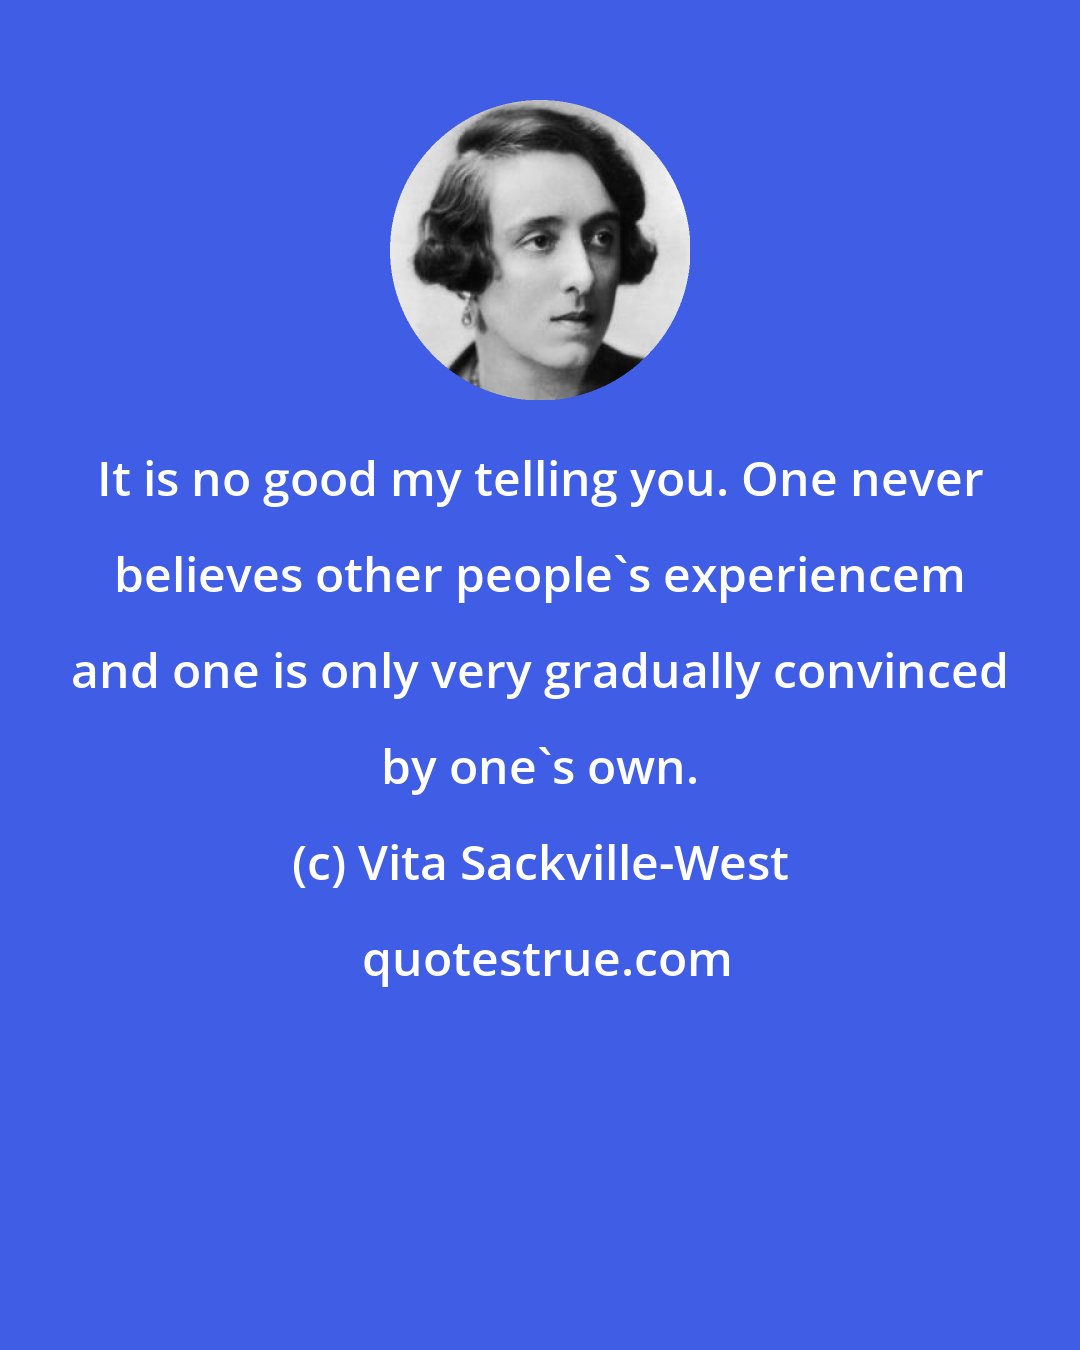 Vita Sackville-West: It is no good my telling you. One never believes other people's experiencem and one is only very gradually convinced by one's own.